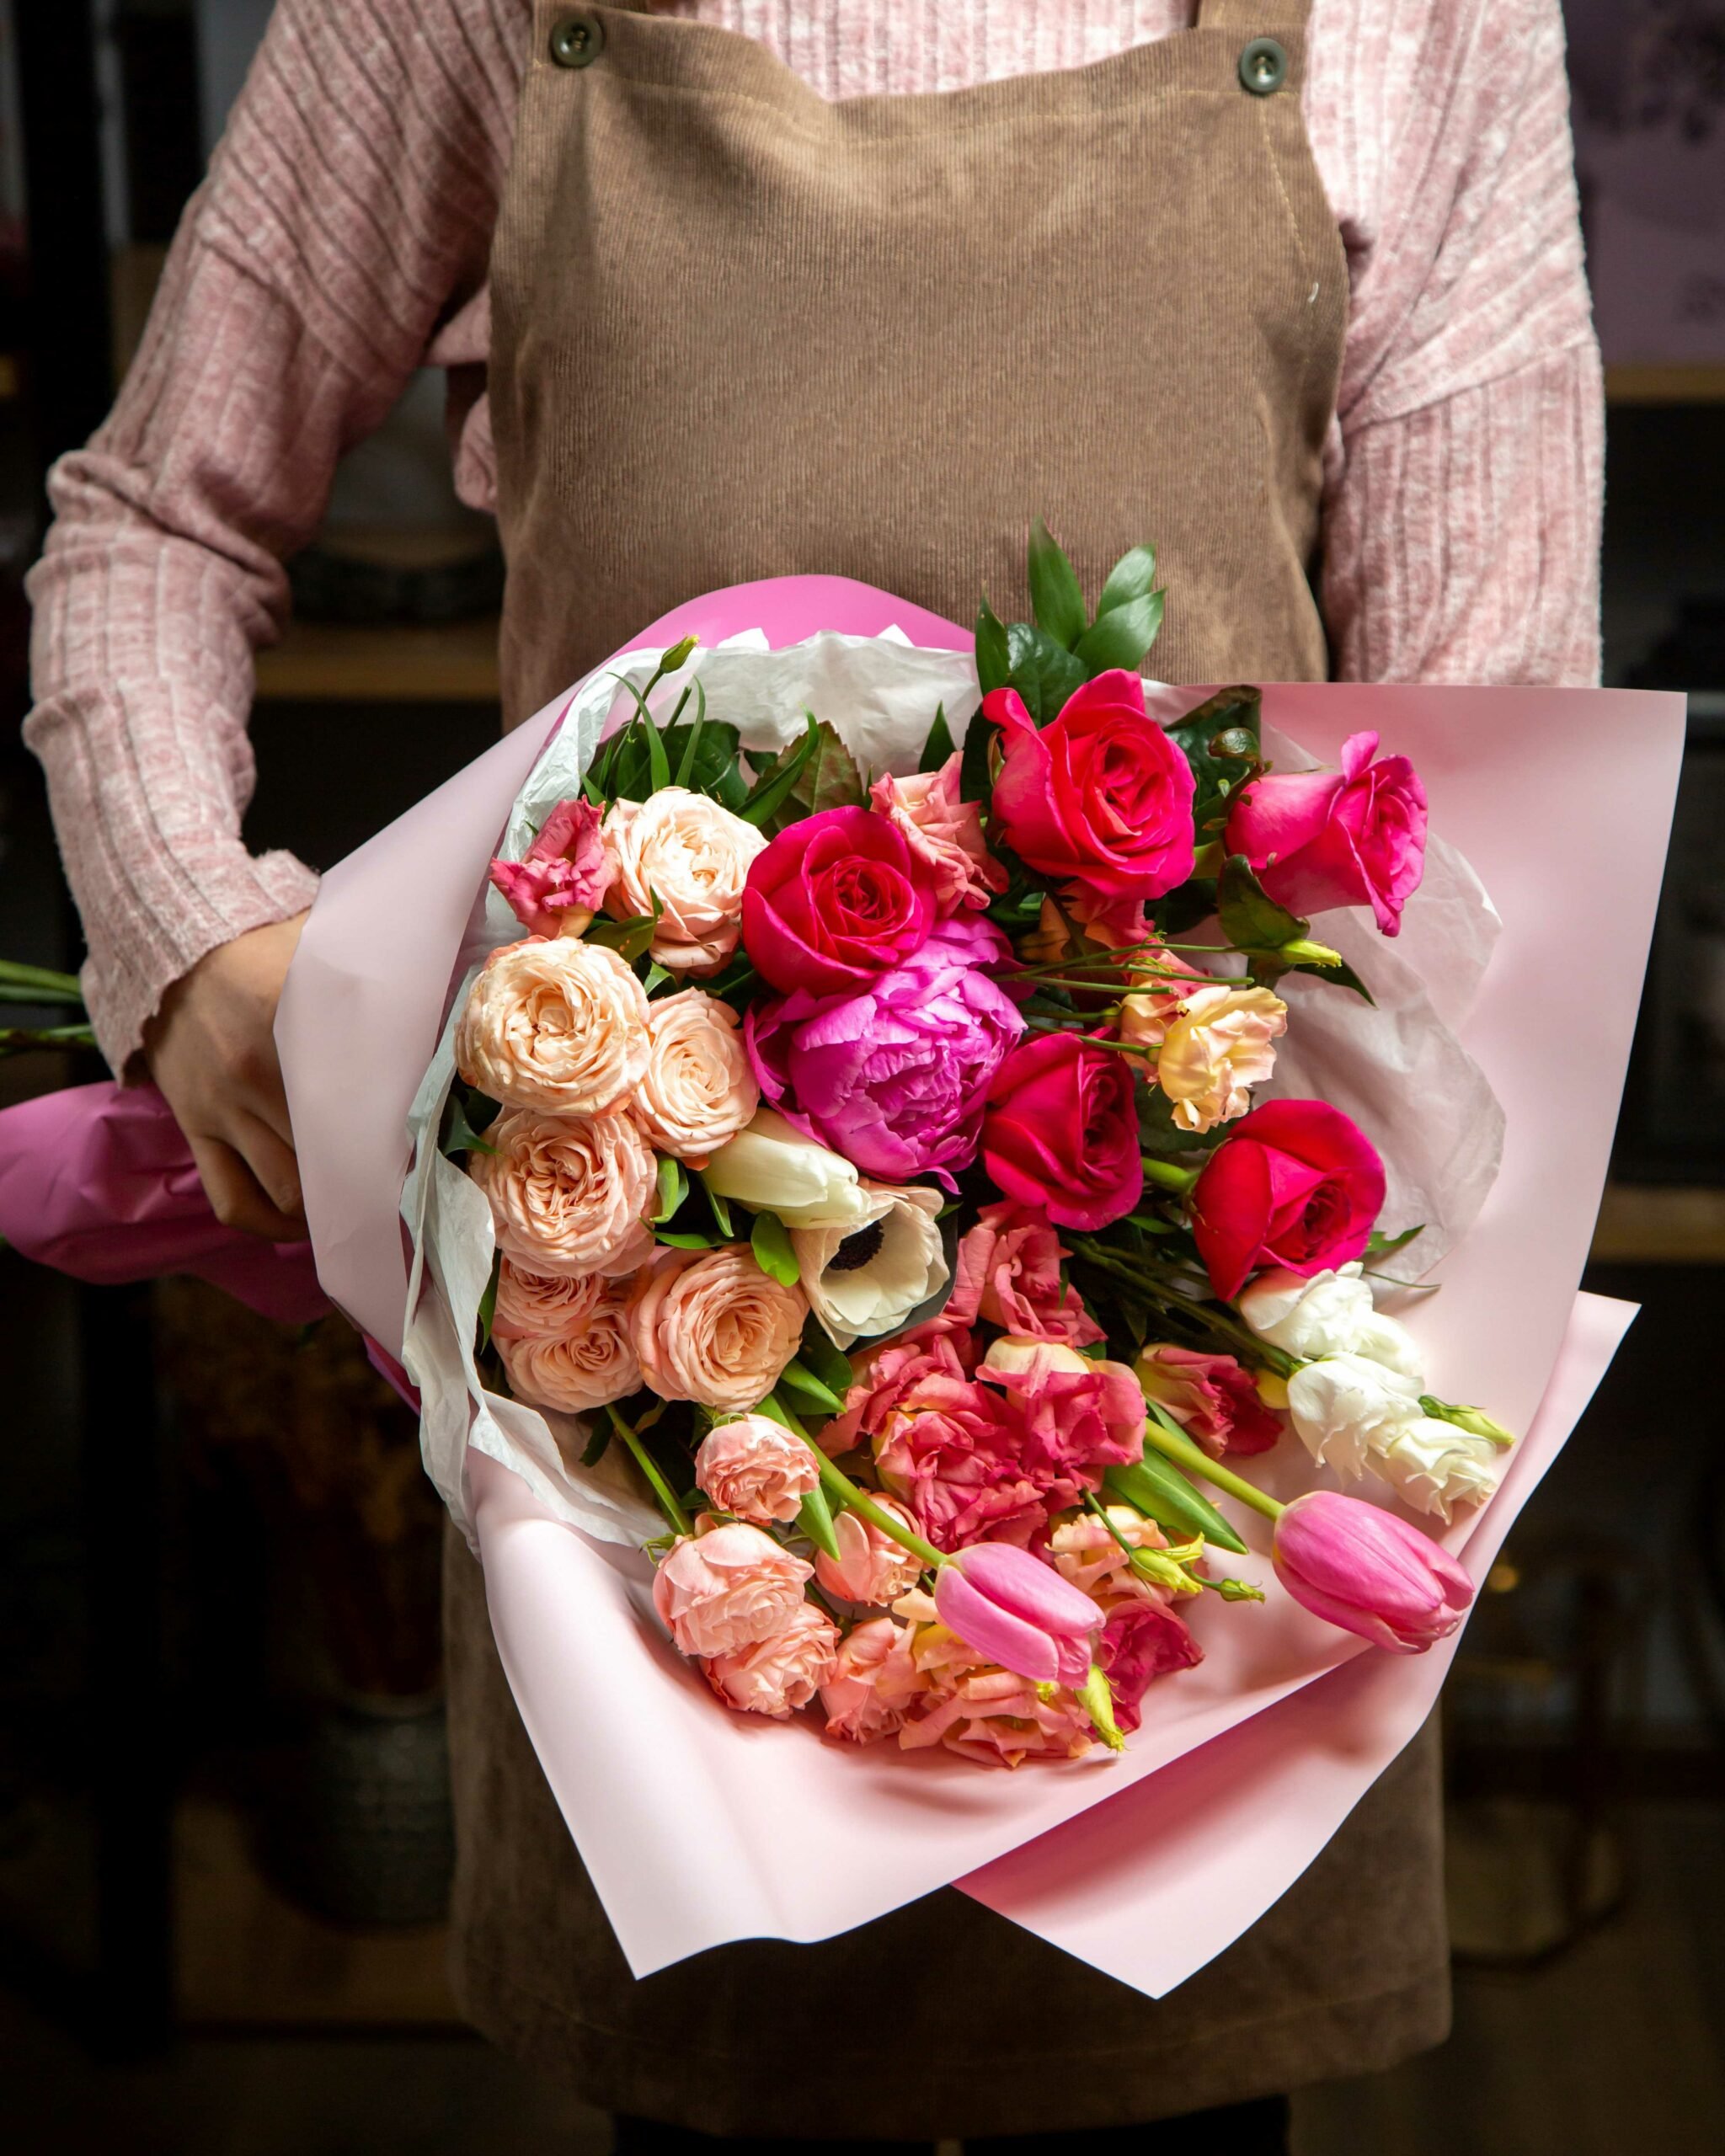 Top moments when flowers turn into personalized surprises